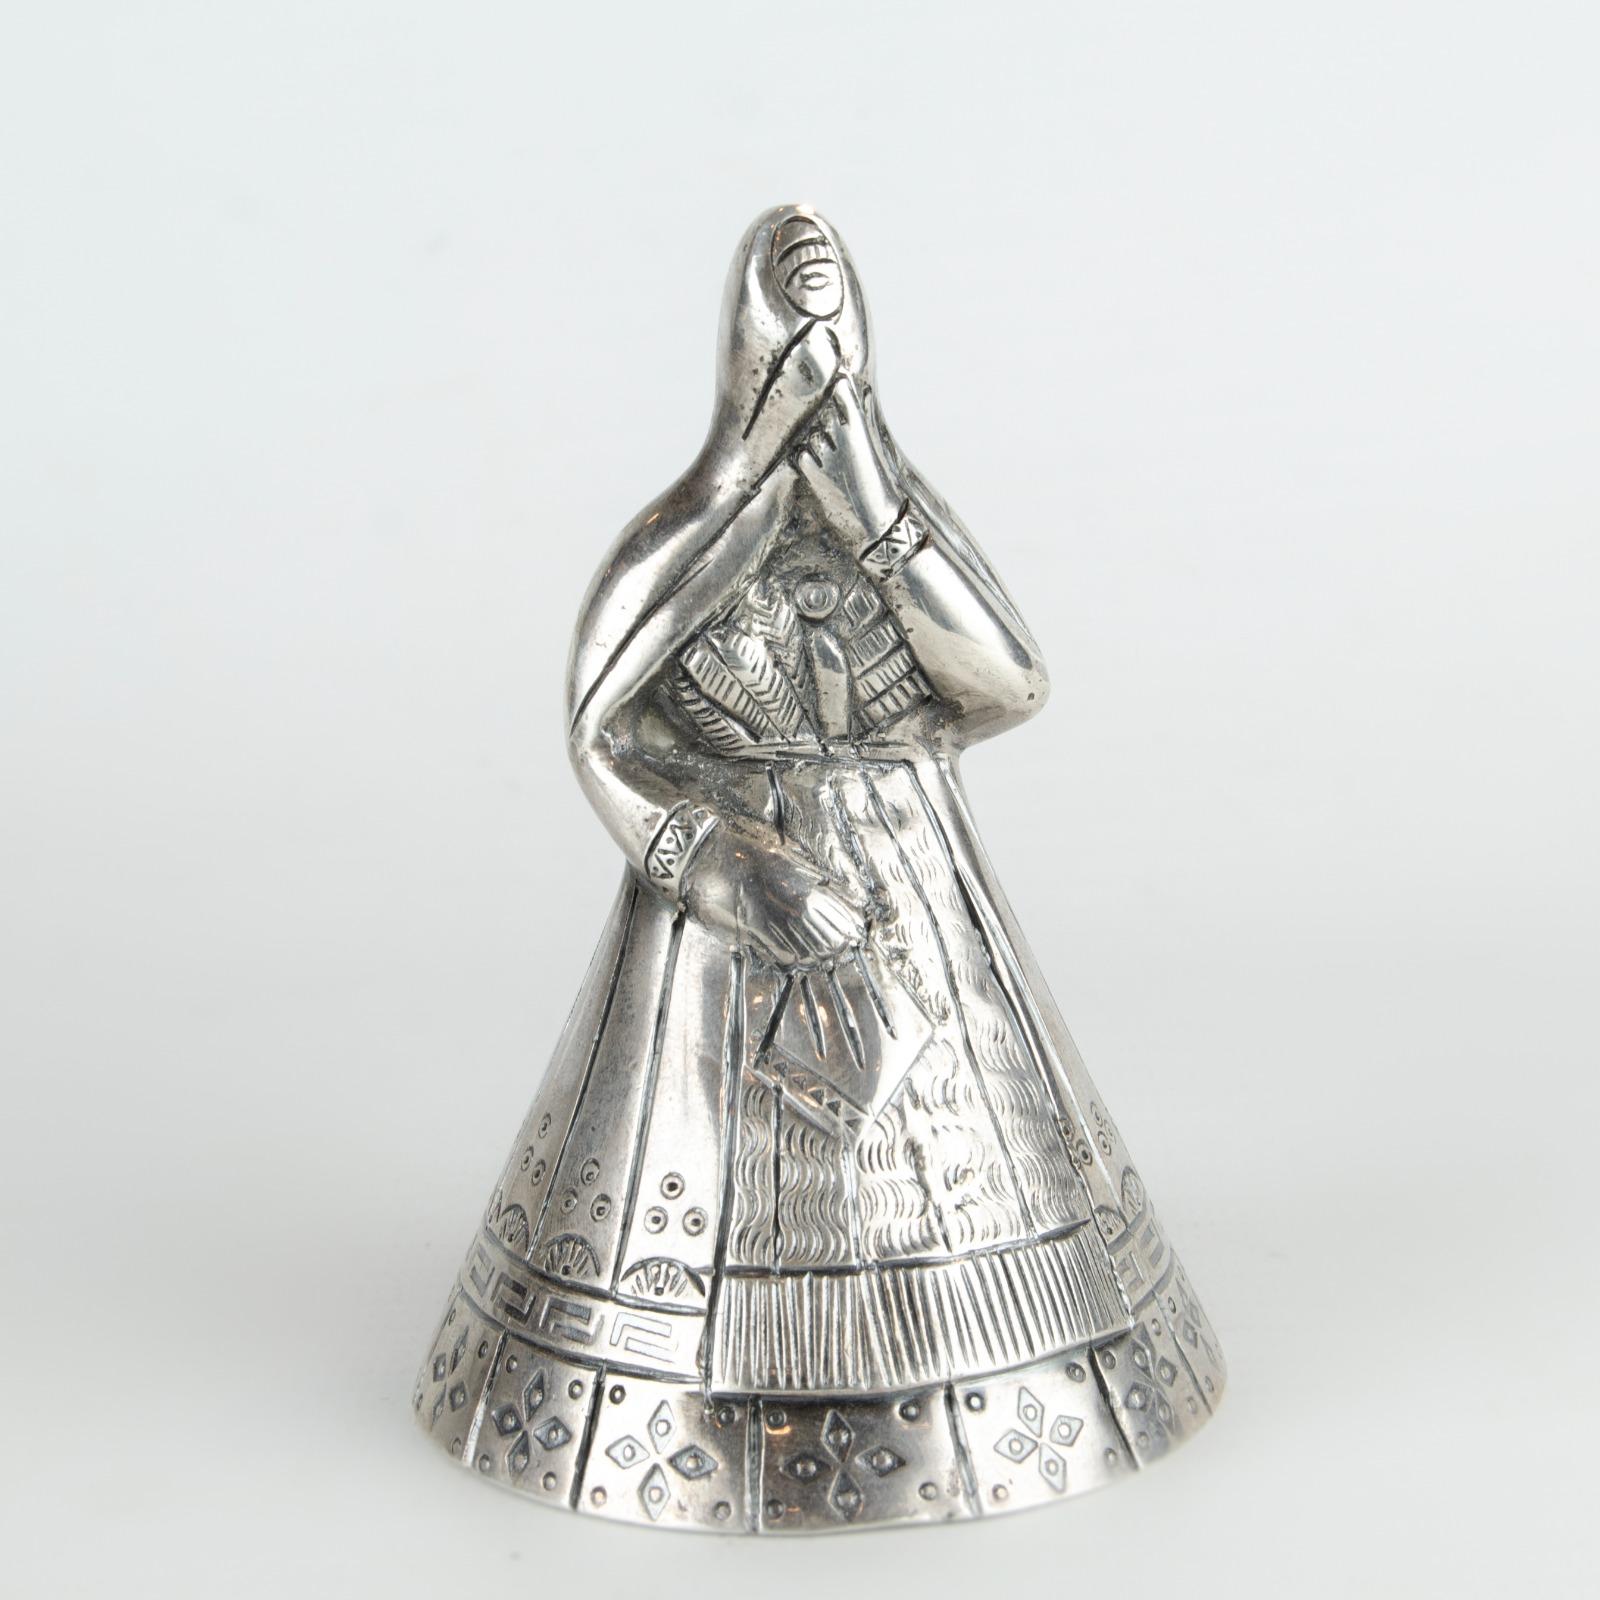 Folk Art Peruvian Table Bell in 925 Silver from the middle - 20th century For Sale